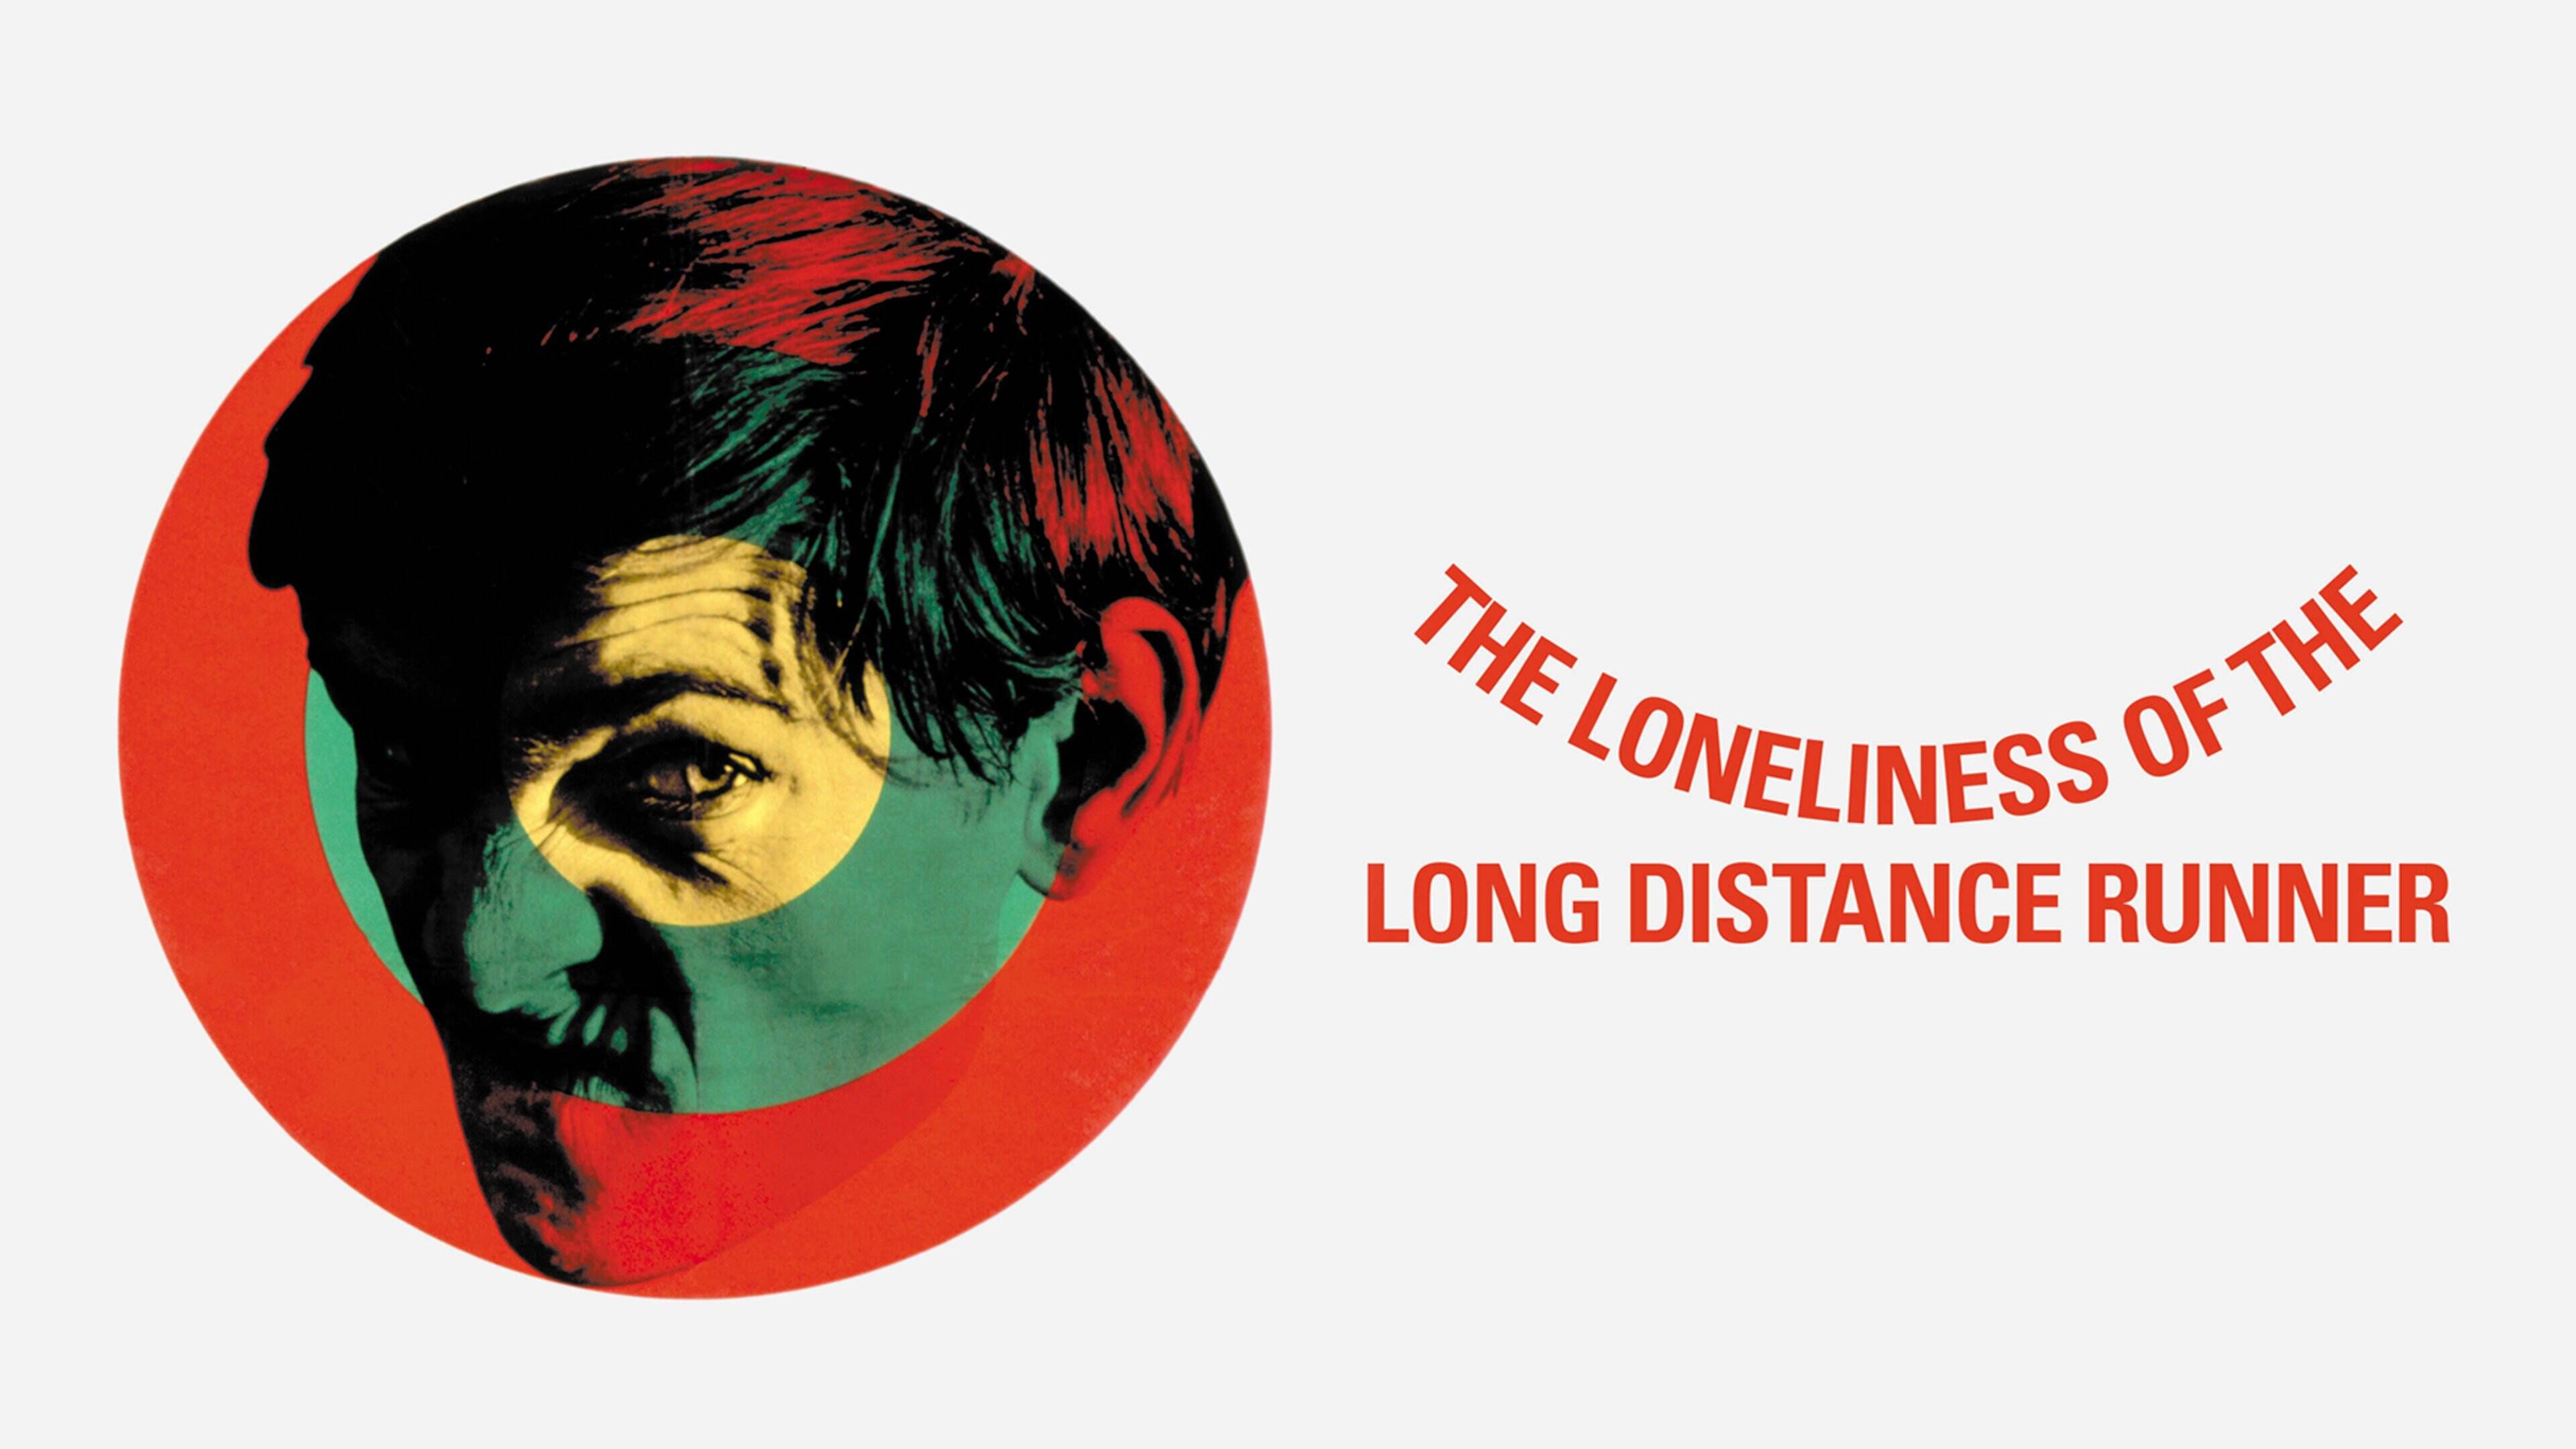 39-facts-about-the-movie-the-loneliness-of-the-long-distance-runner